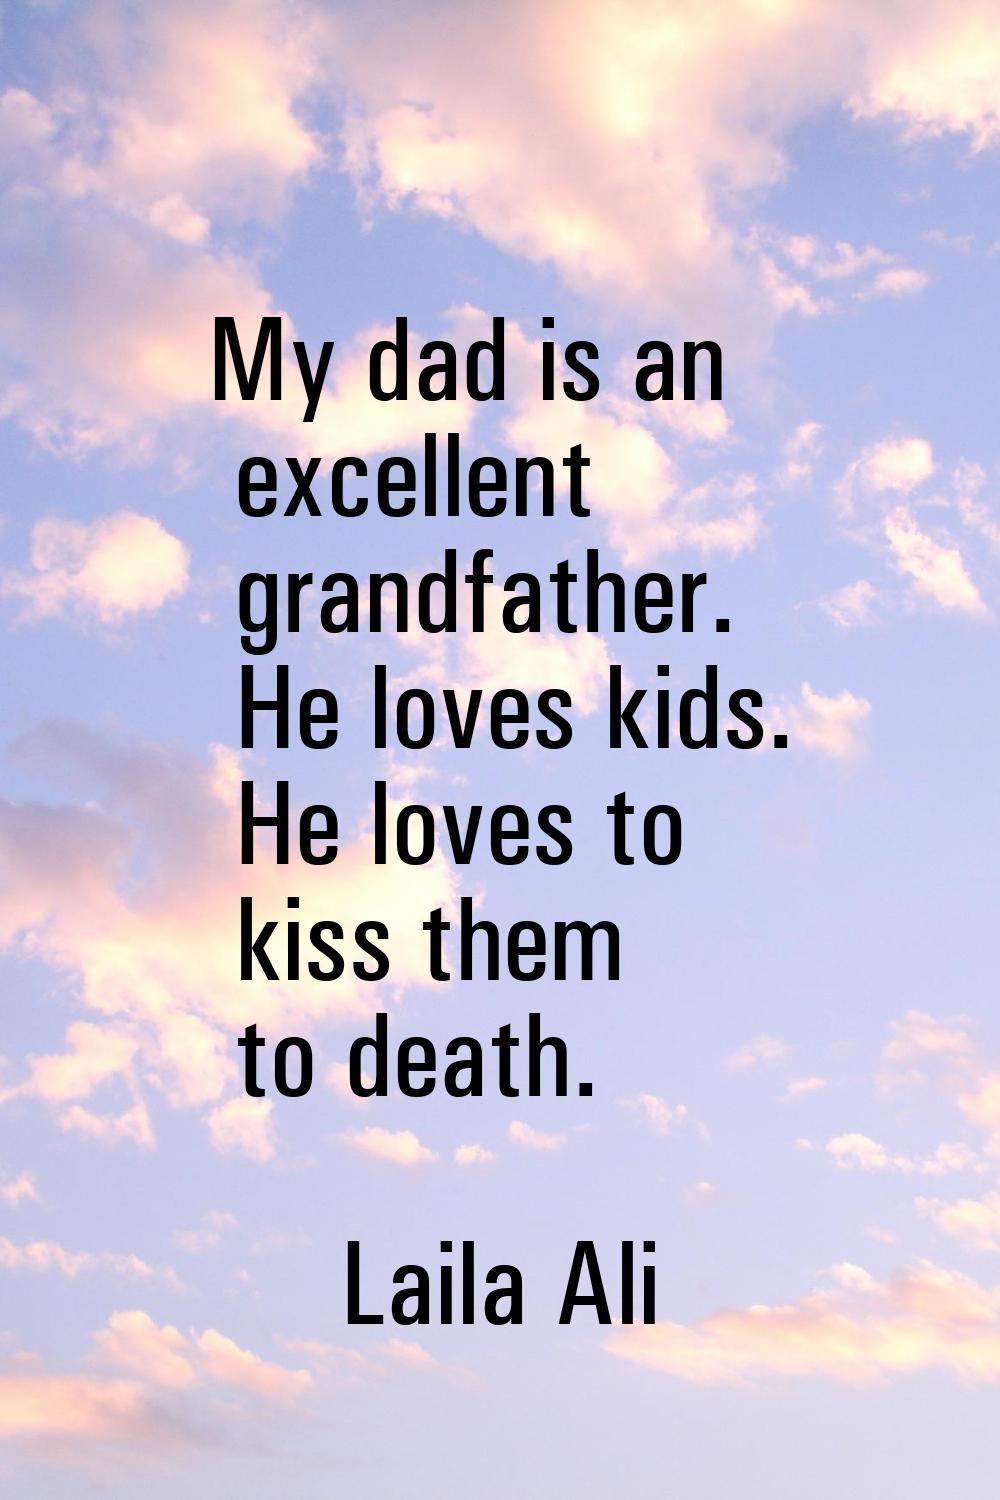 My dad is an excellent grandfather. He loves kids. He loves to kiss them to death.